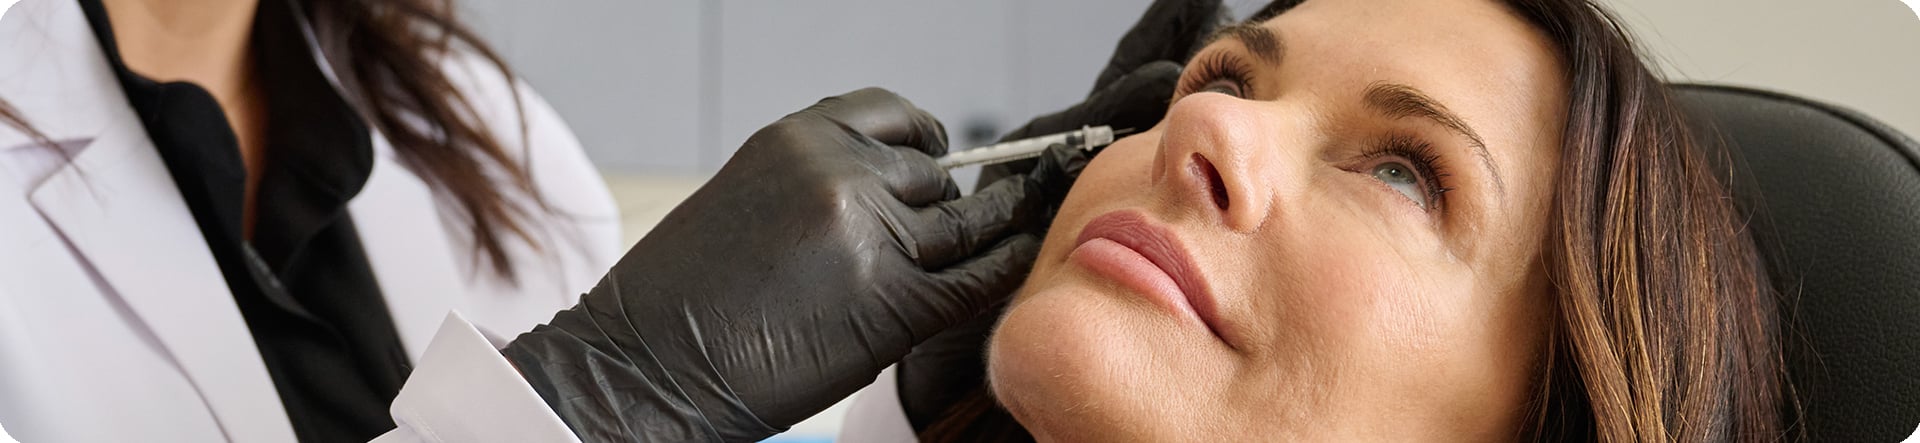 Image: Close-up photograph capturing a woman receiving a facial injectable treatment. A healthcare professional, dressed in a white coat and black gloves, carefully administers a needle near the woman's eye area. The focus is on the precise procedure, emphasizing professionalism and care in aesthetic treatments.